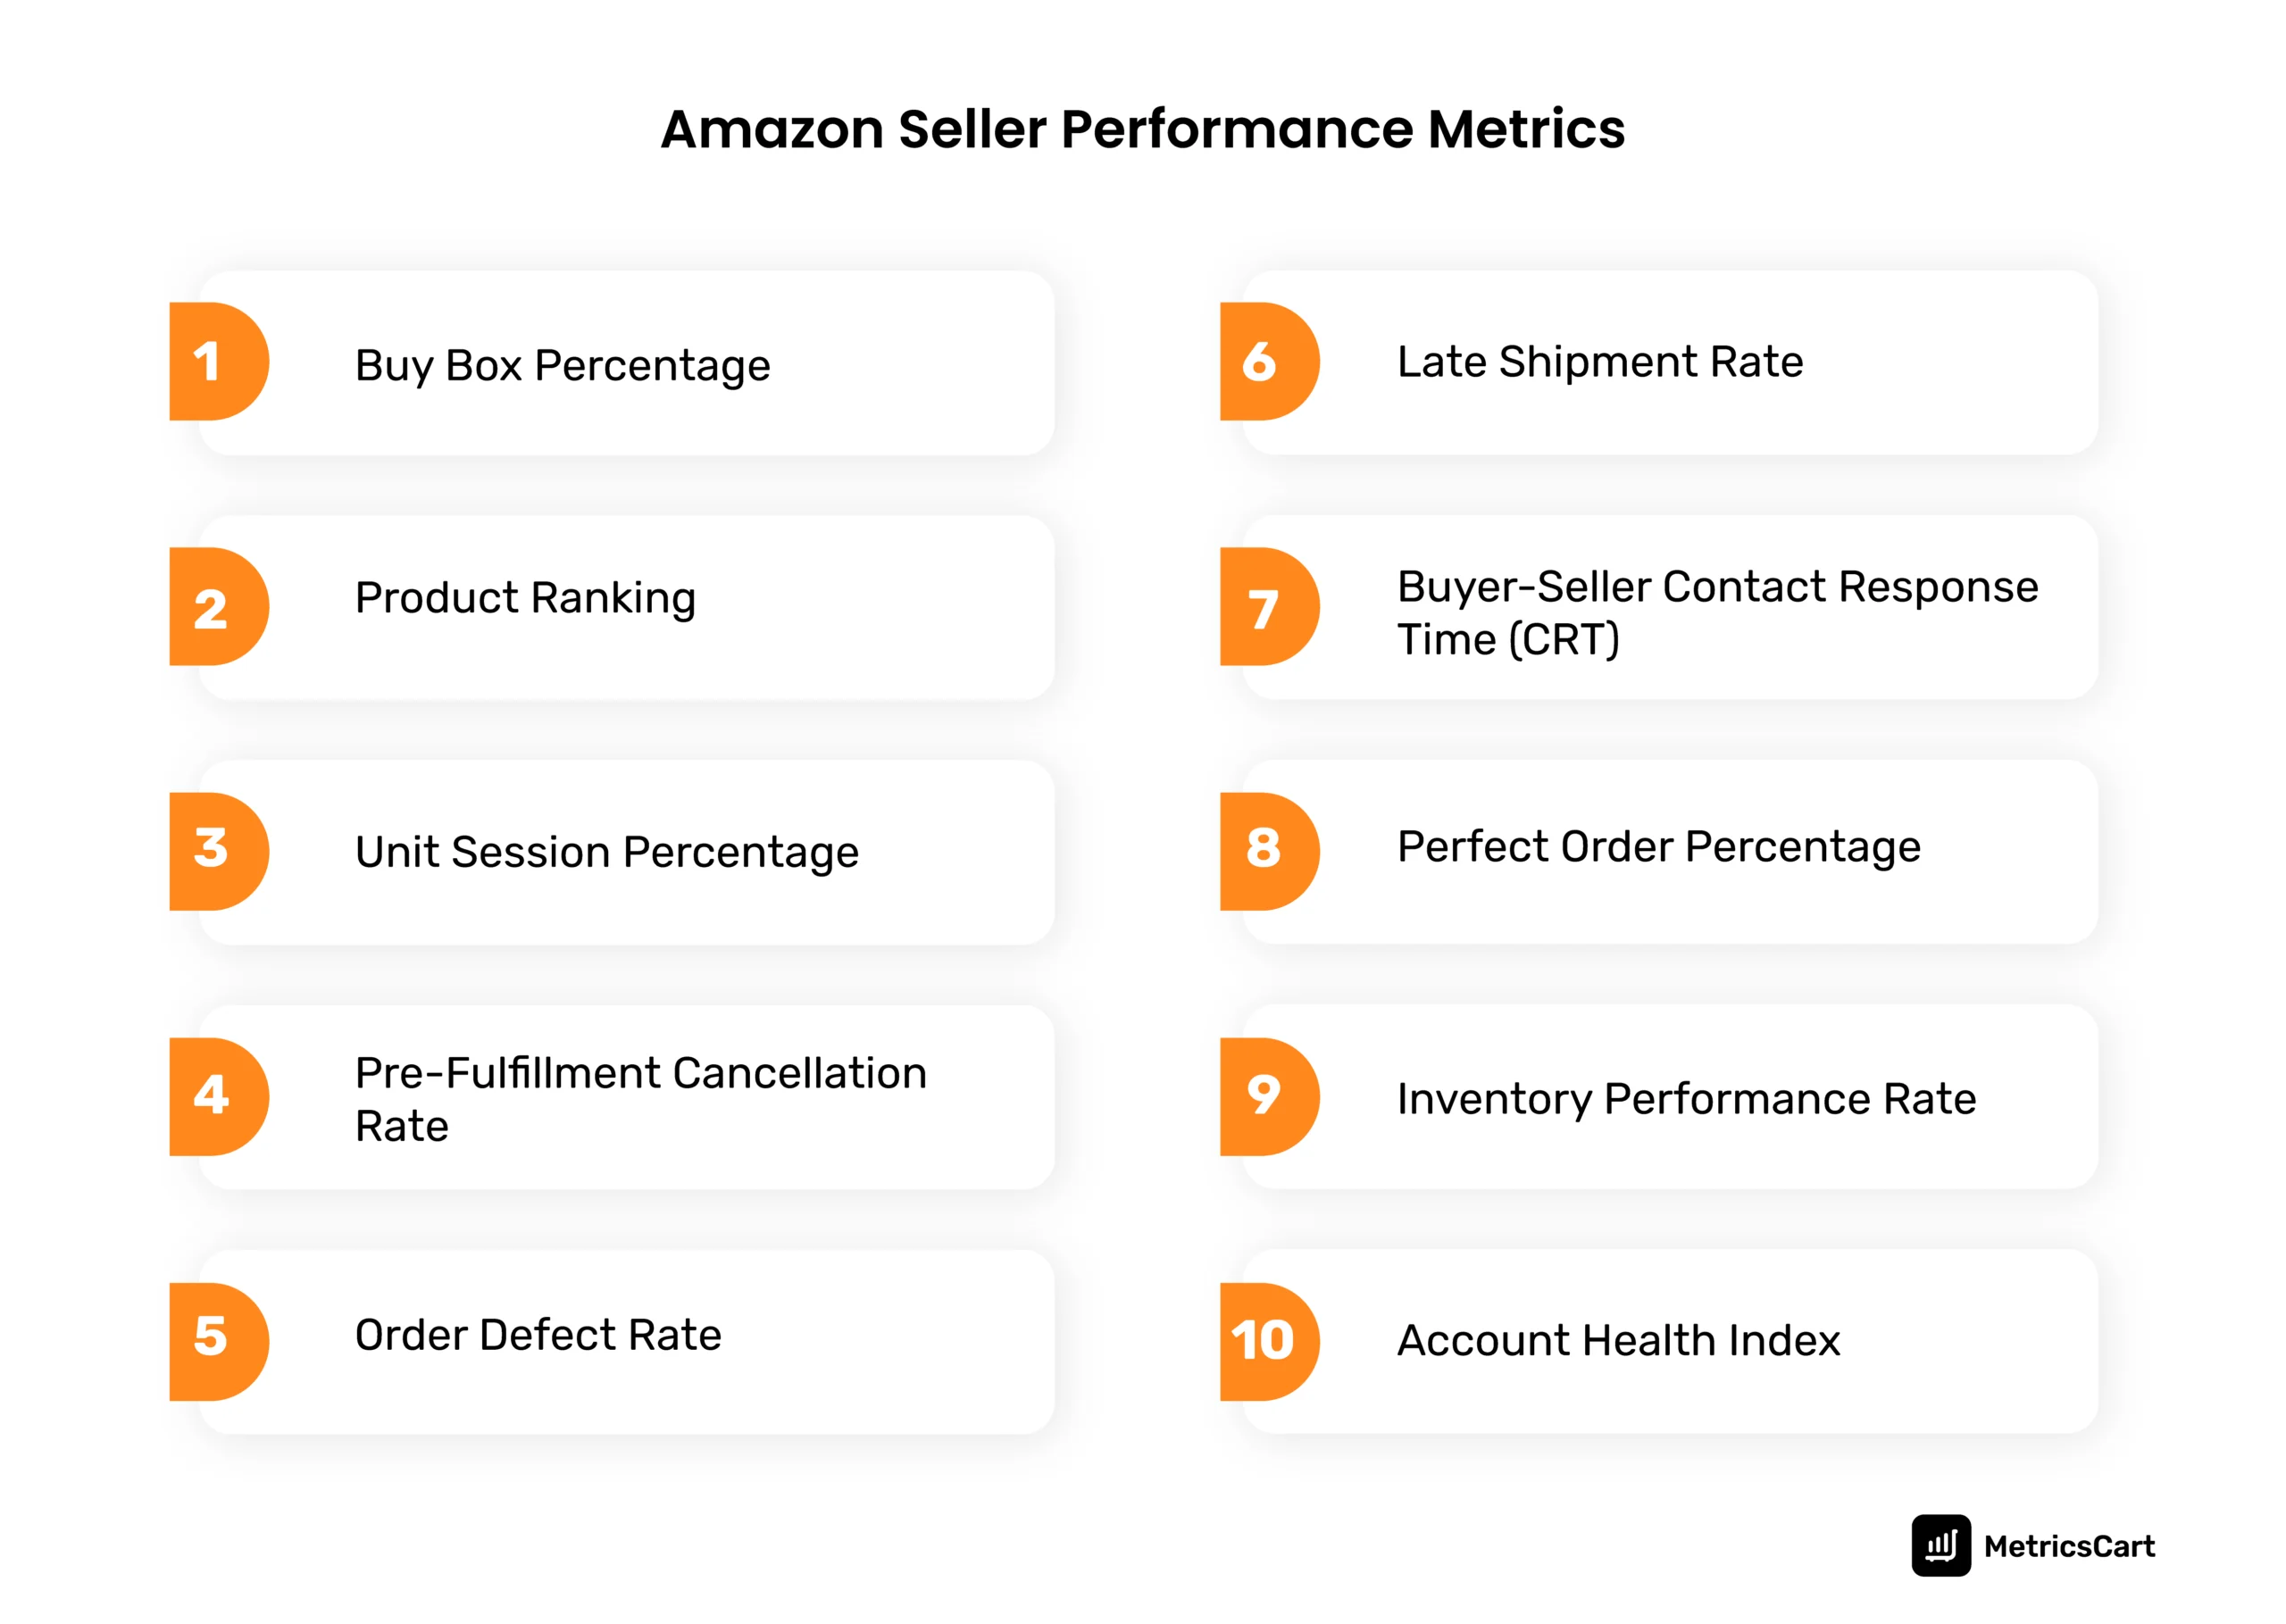 An infographic showing the various Amazon performance metrics for sellers